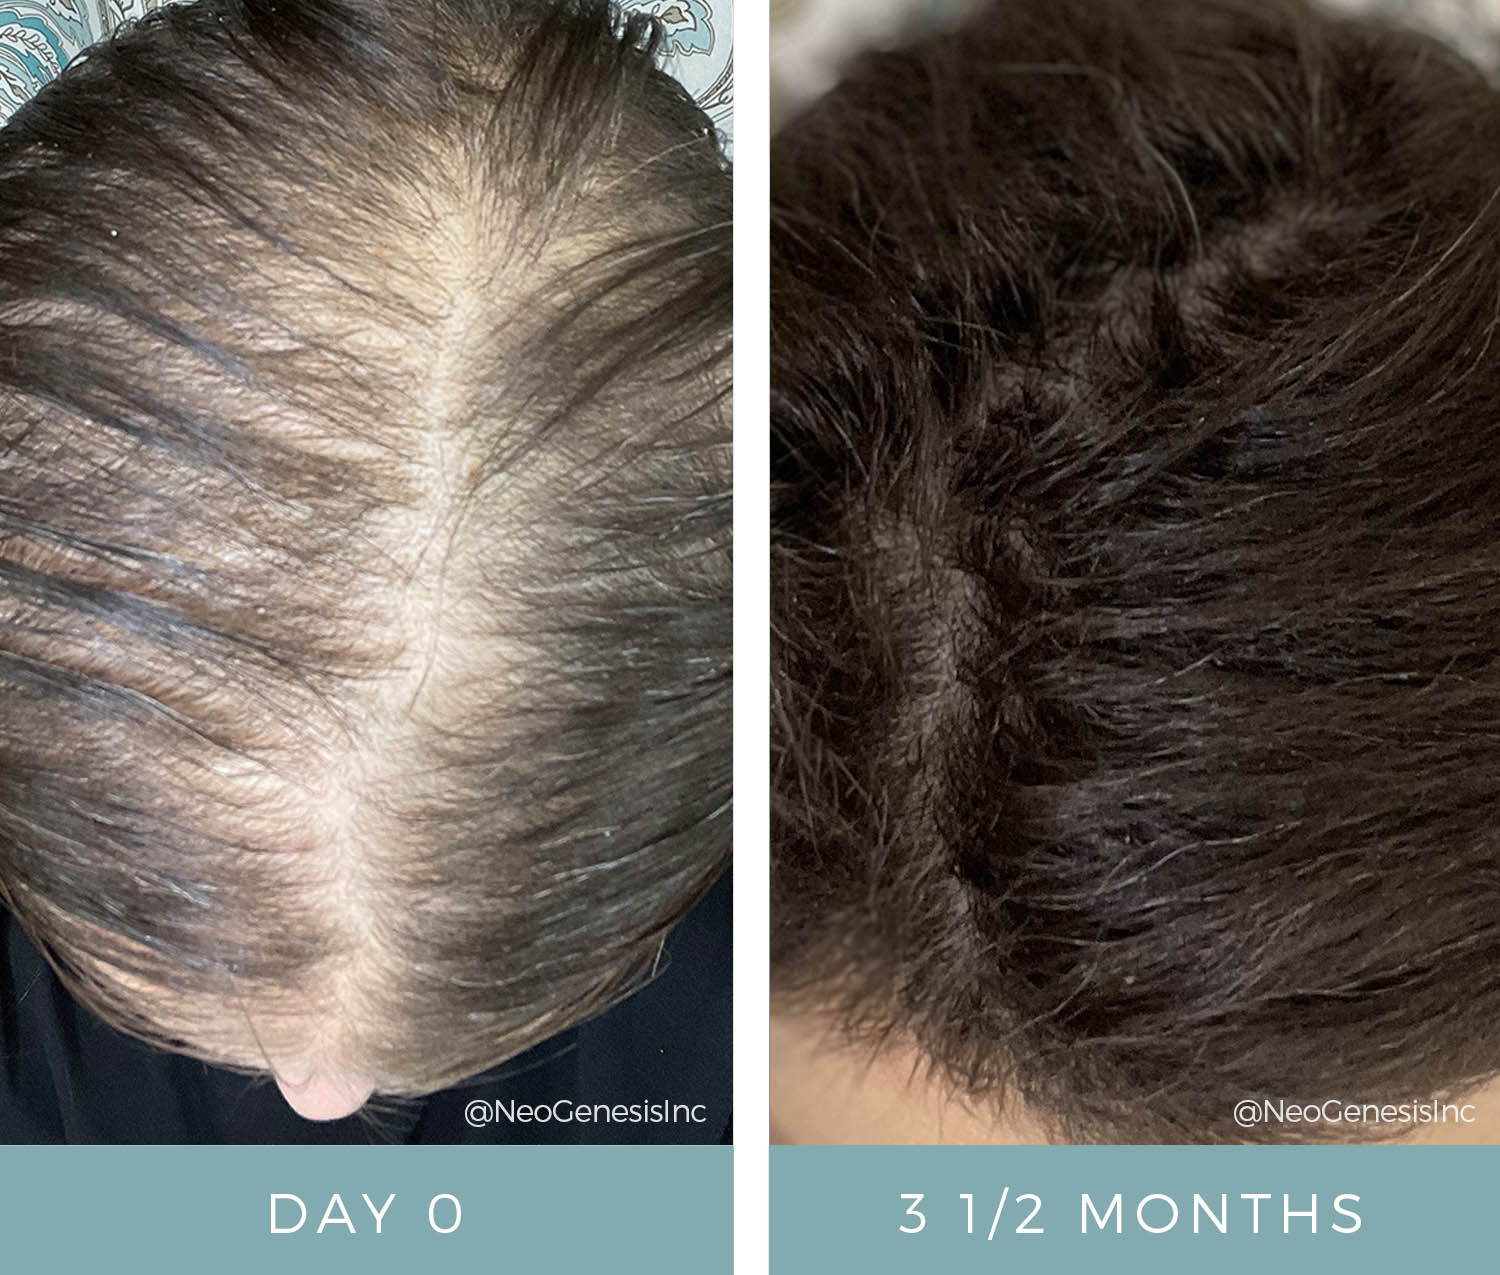 Chemo side effects - Hair Loss